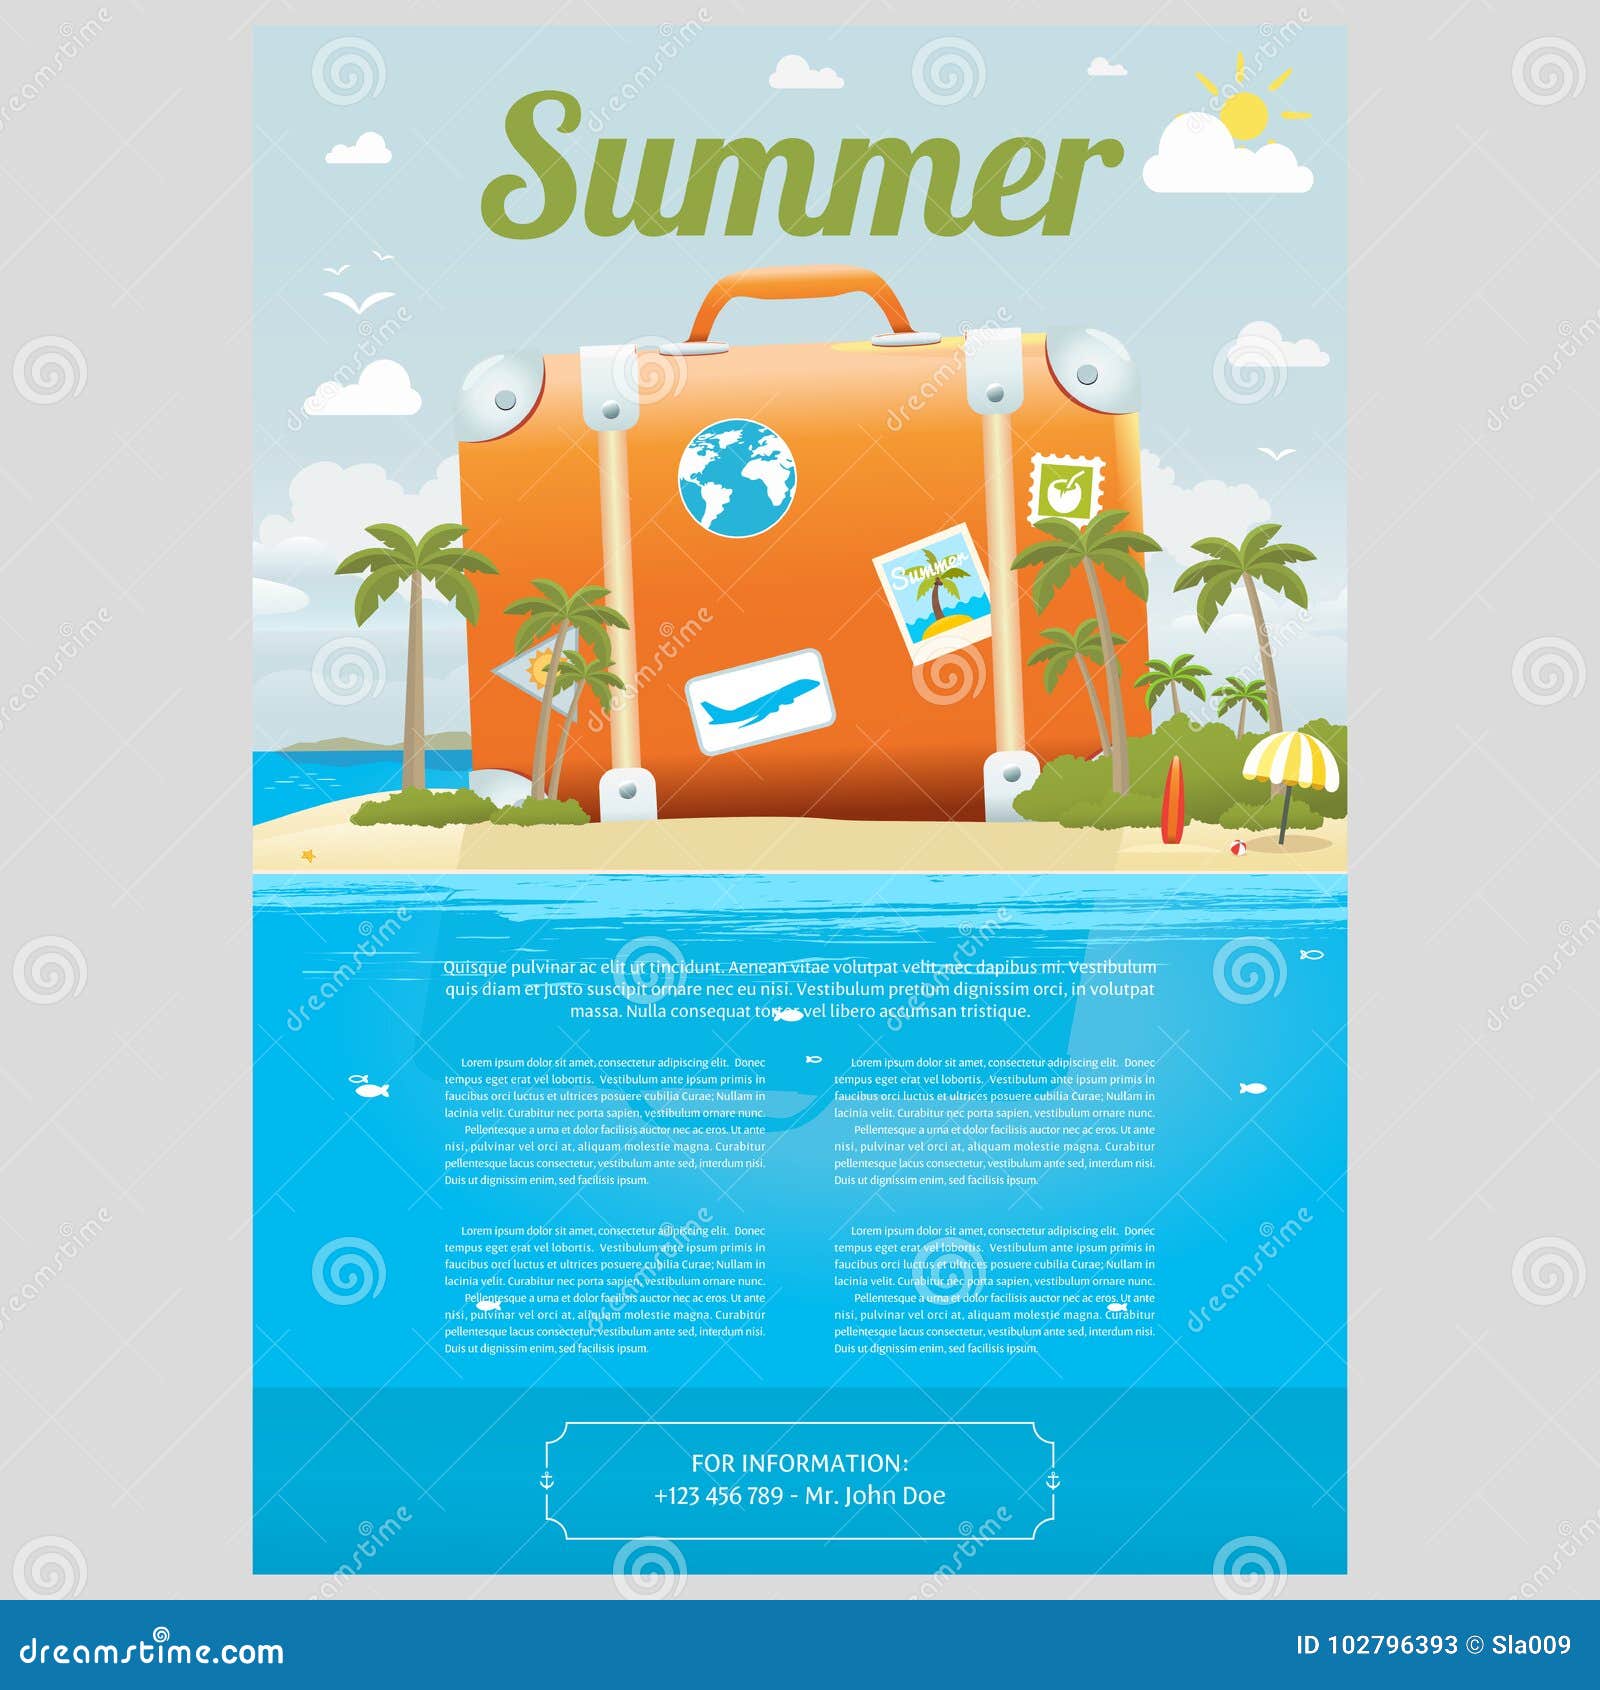 Vector Illustration of Travel Suitcase on the Sea Island Stock For Island Brochure Template